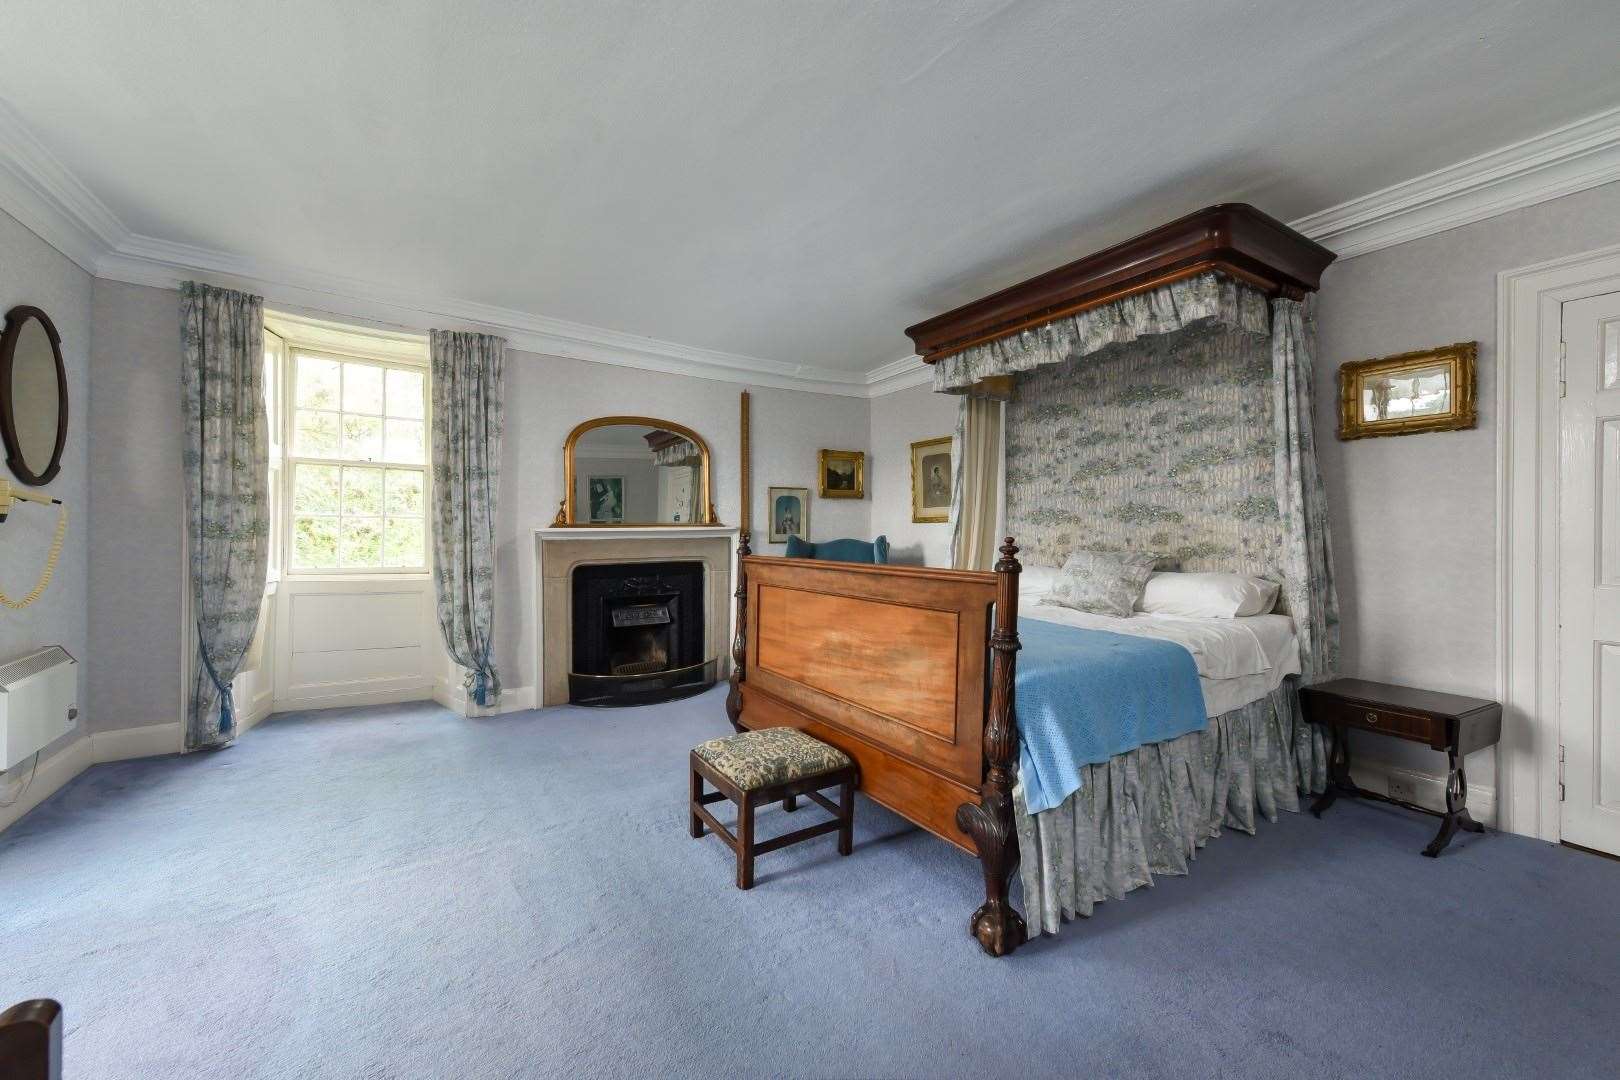 One of the bedrooms at Kilravock Castle.